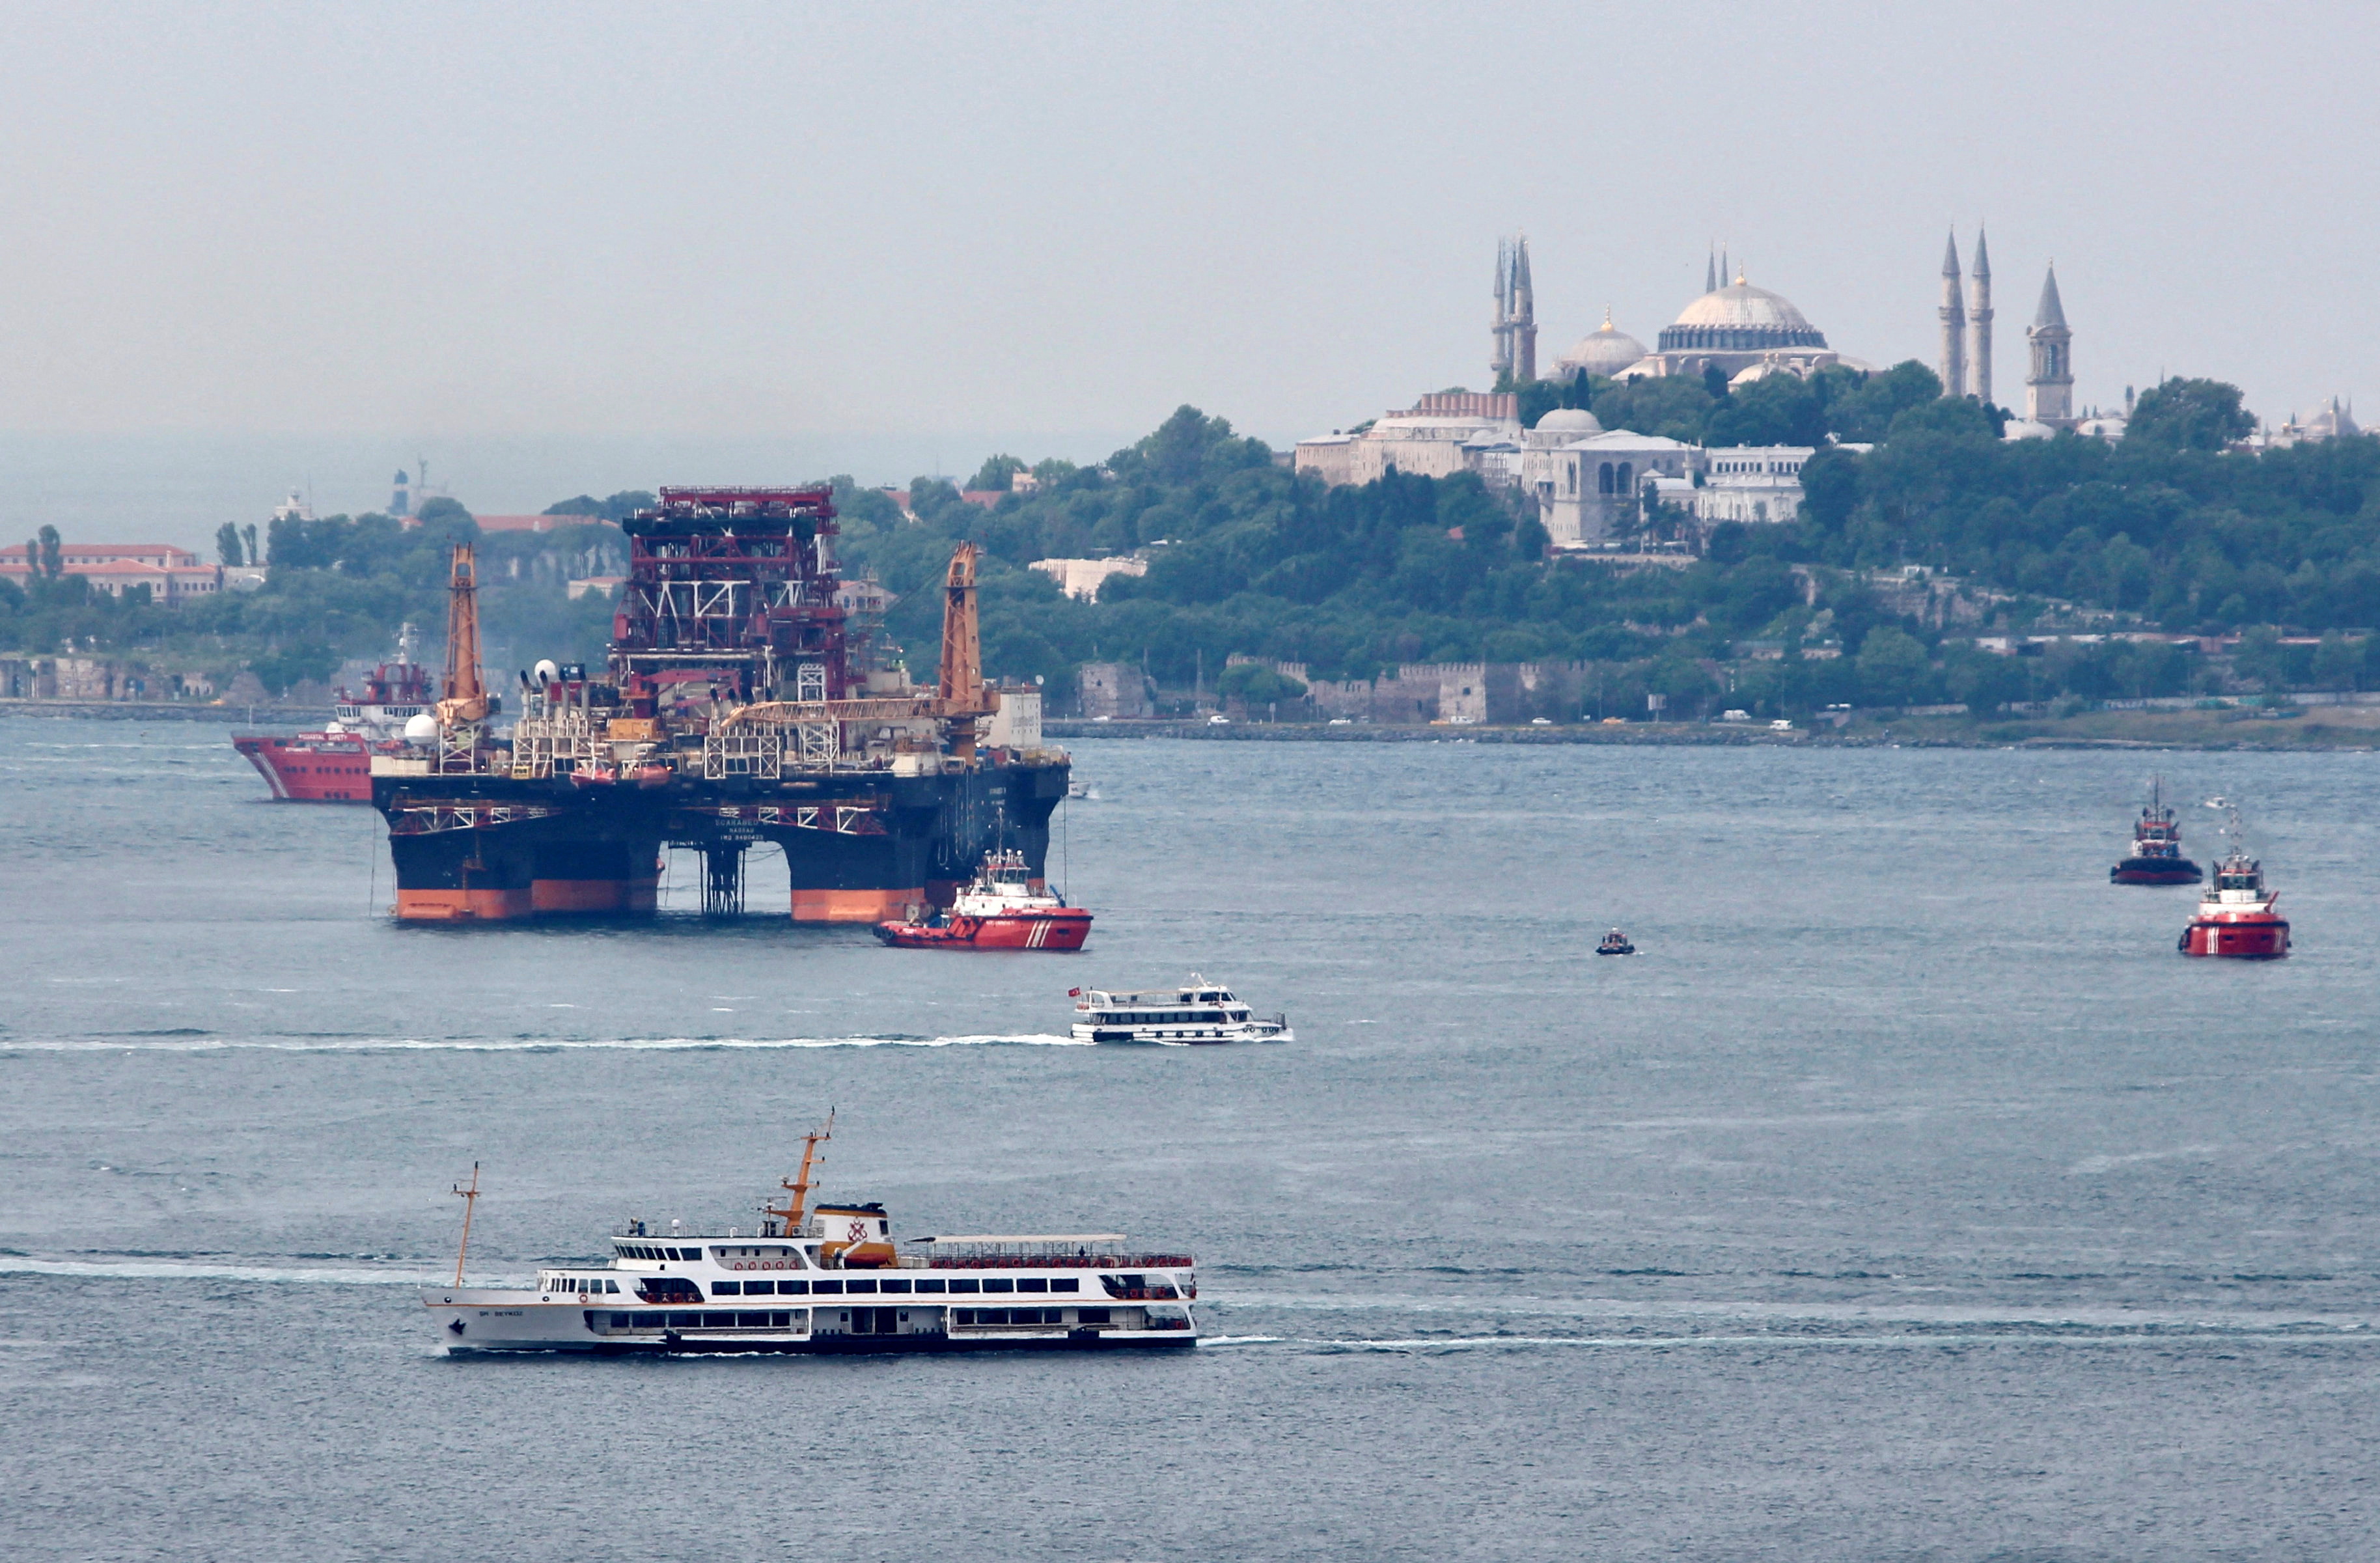 Drilling vessel Scarabeo 9, owned by Italian oil service group Saipem, sails in the Bosphorus in Istanbul